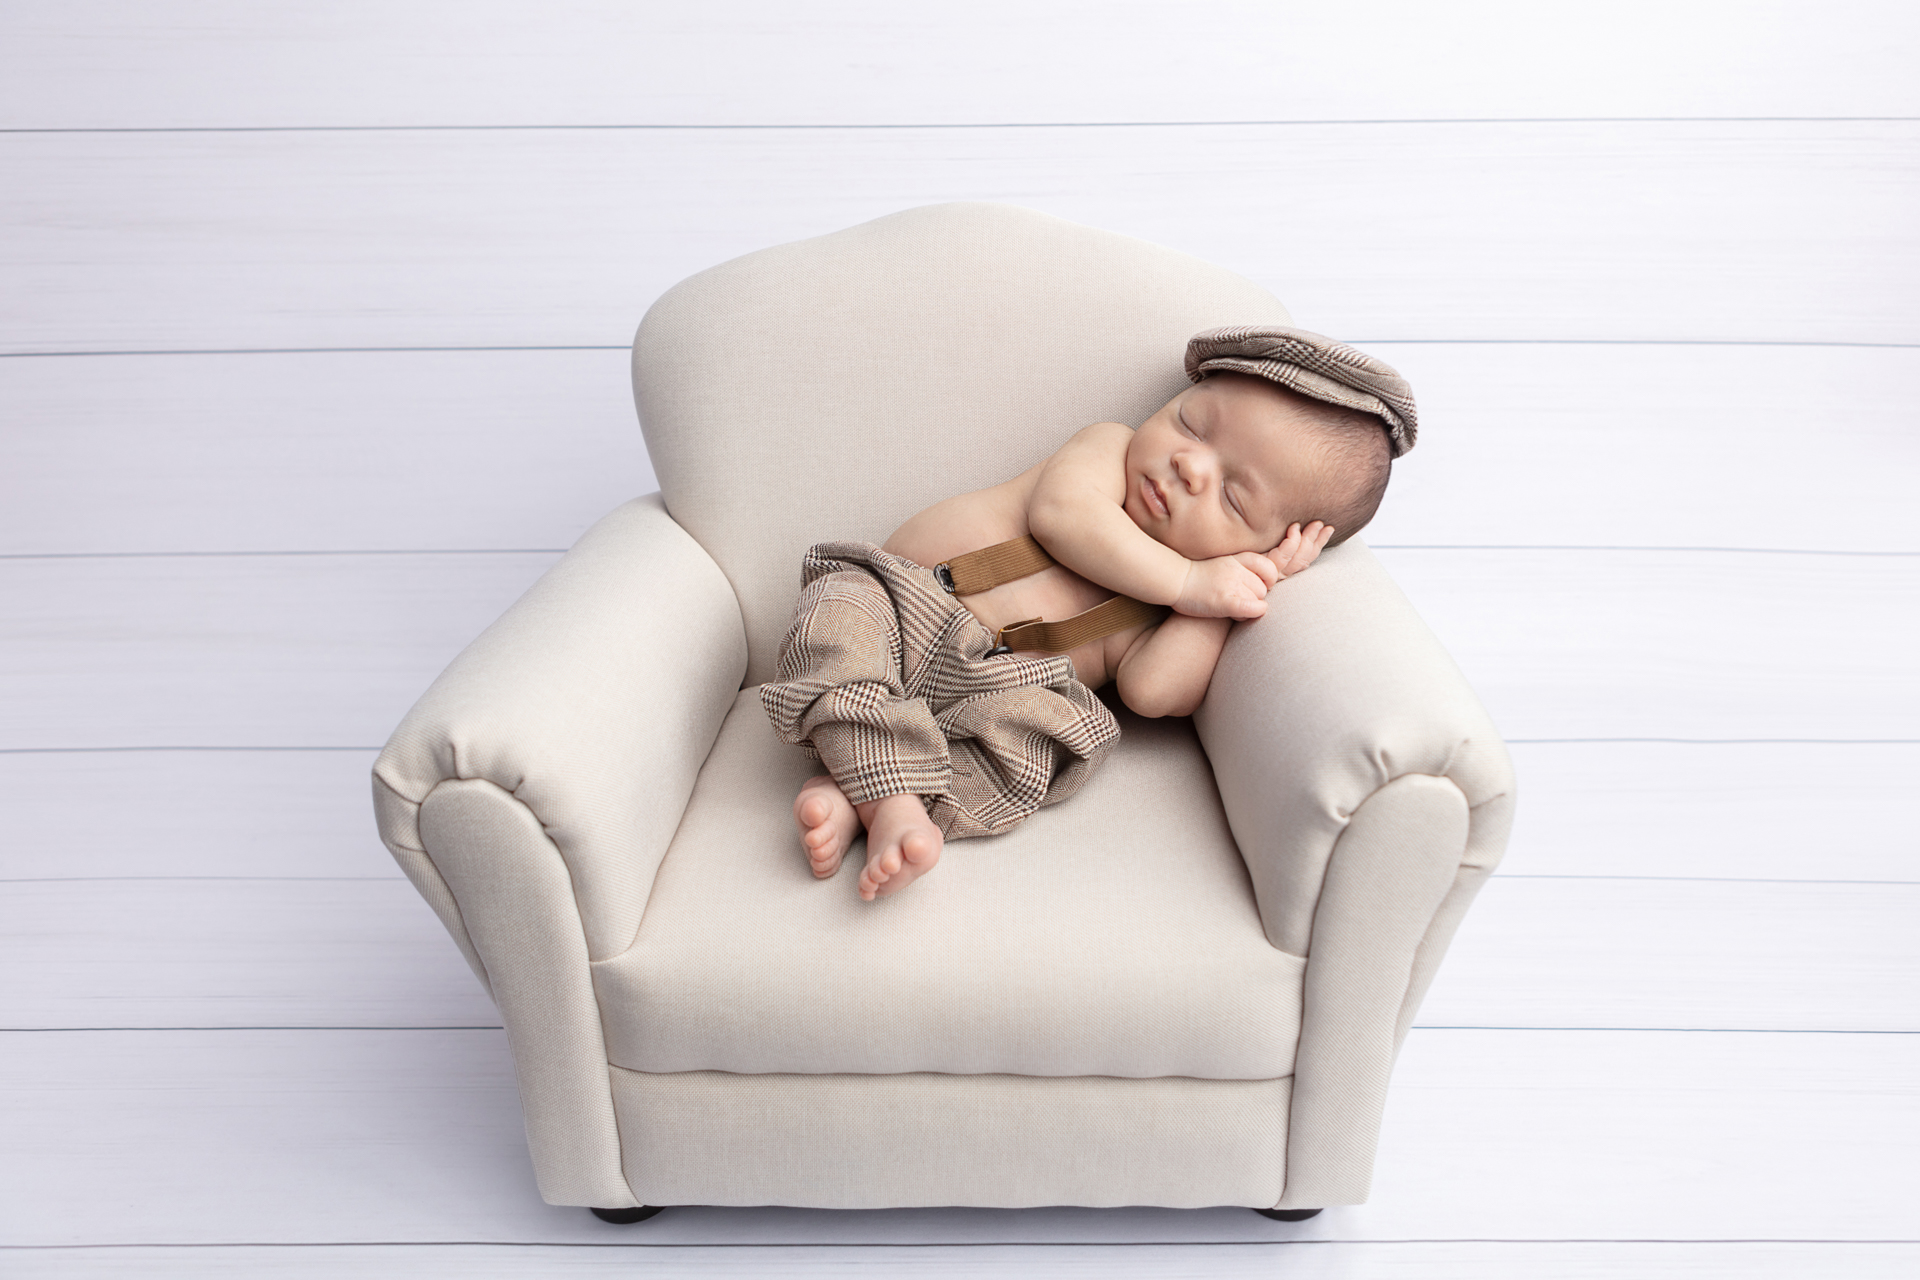 baby boy propped on a neutral oversized chair, wearing a cap and suspenders; CT newborn photography